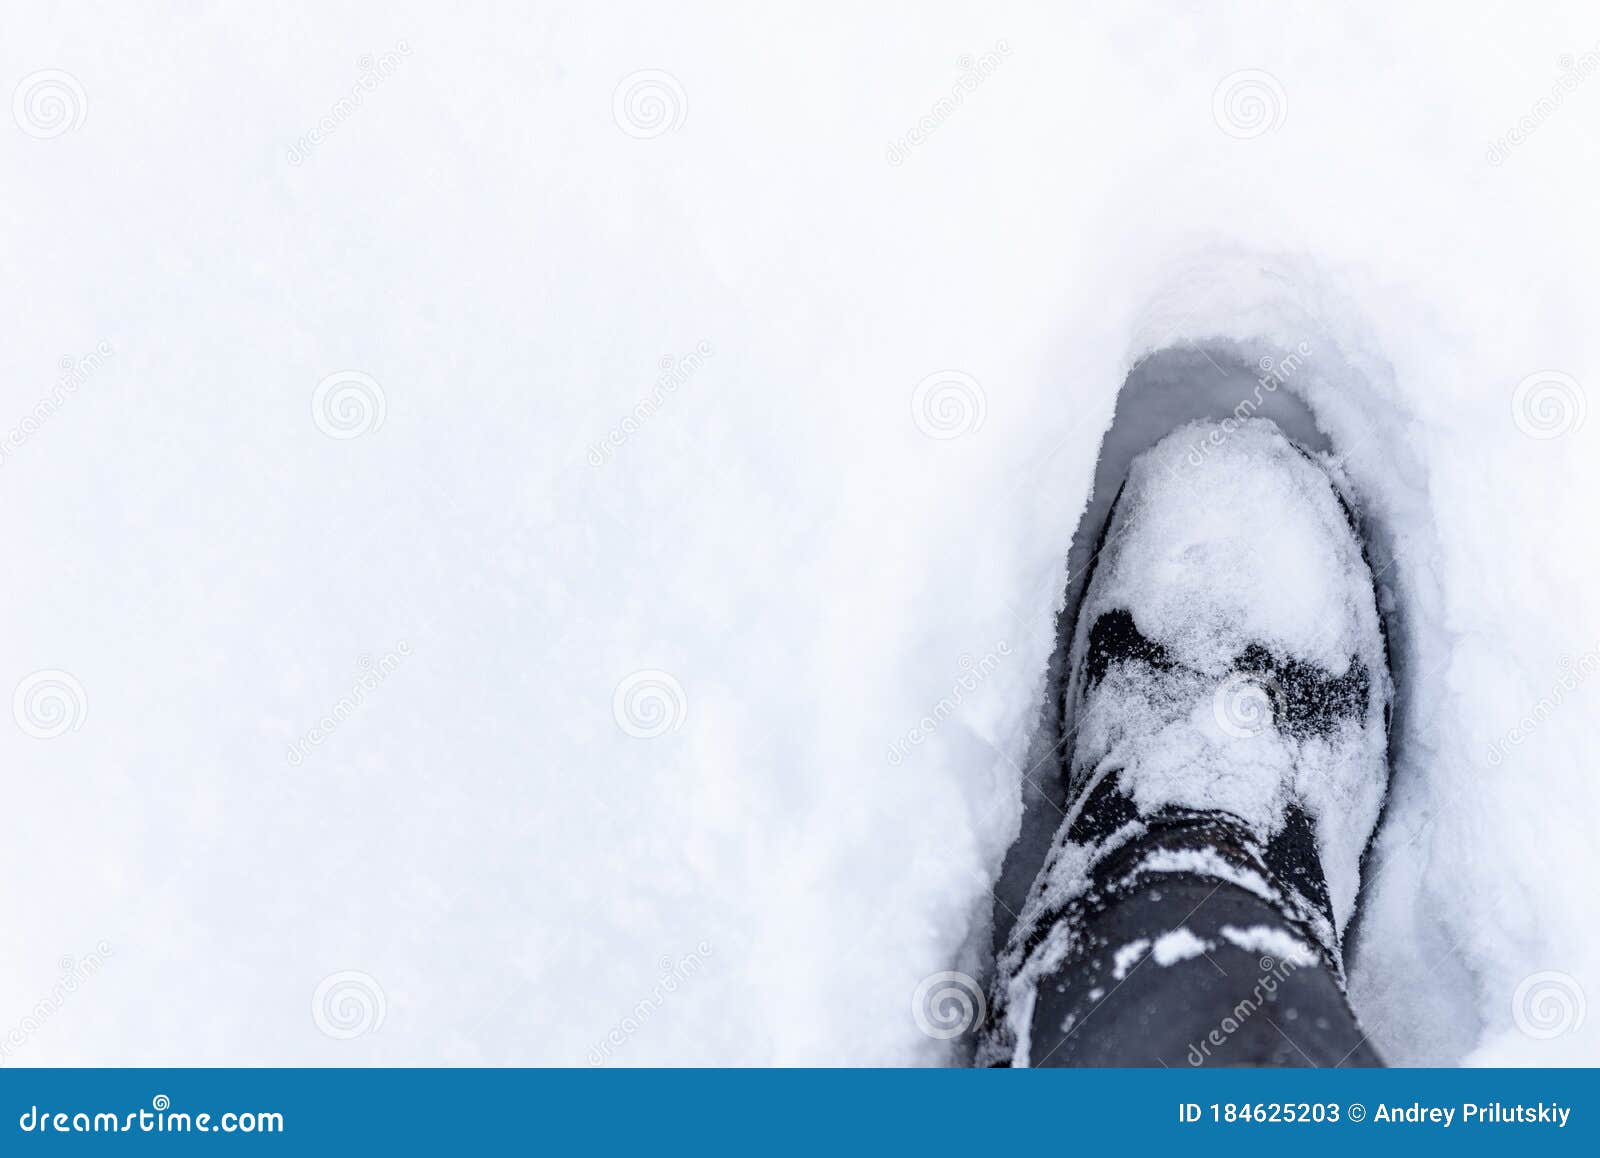 Boot in the Snow. Footprint in the Snow Stock Image - Image of clean ...